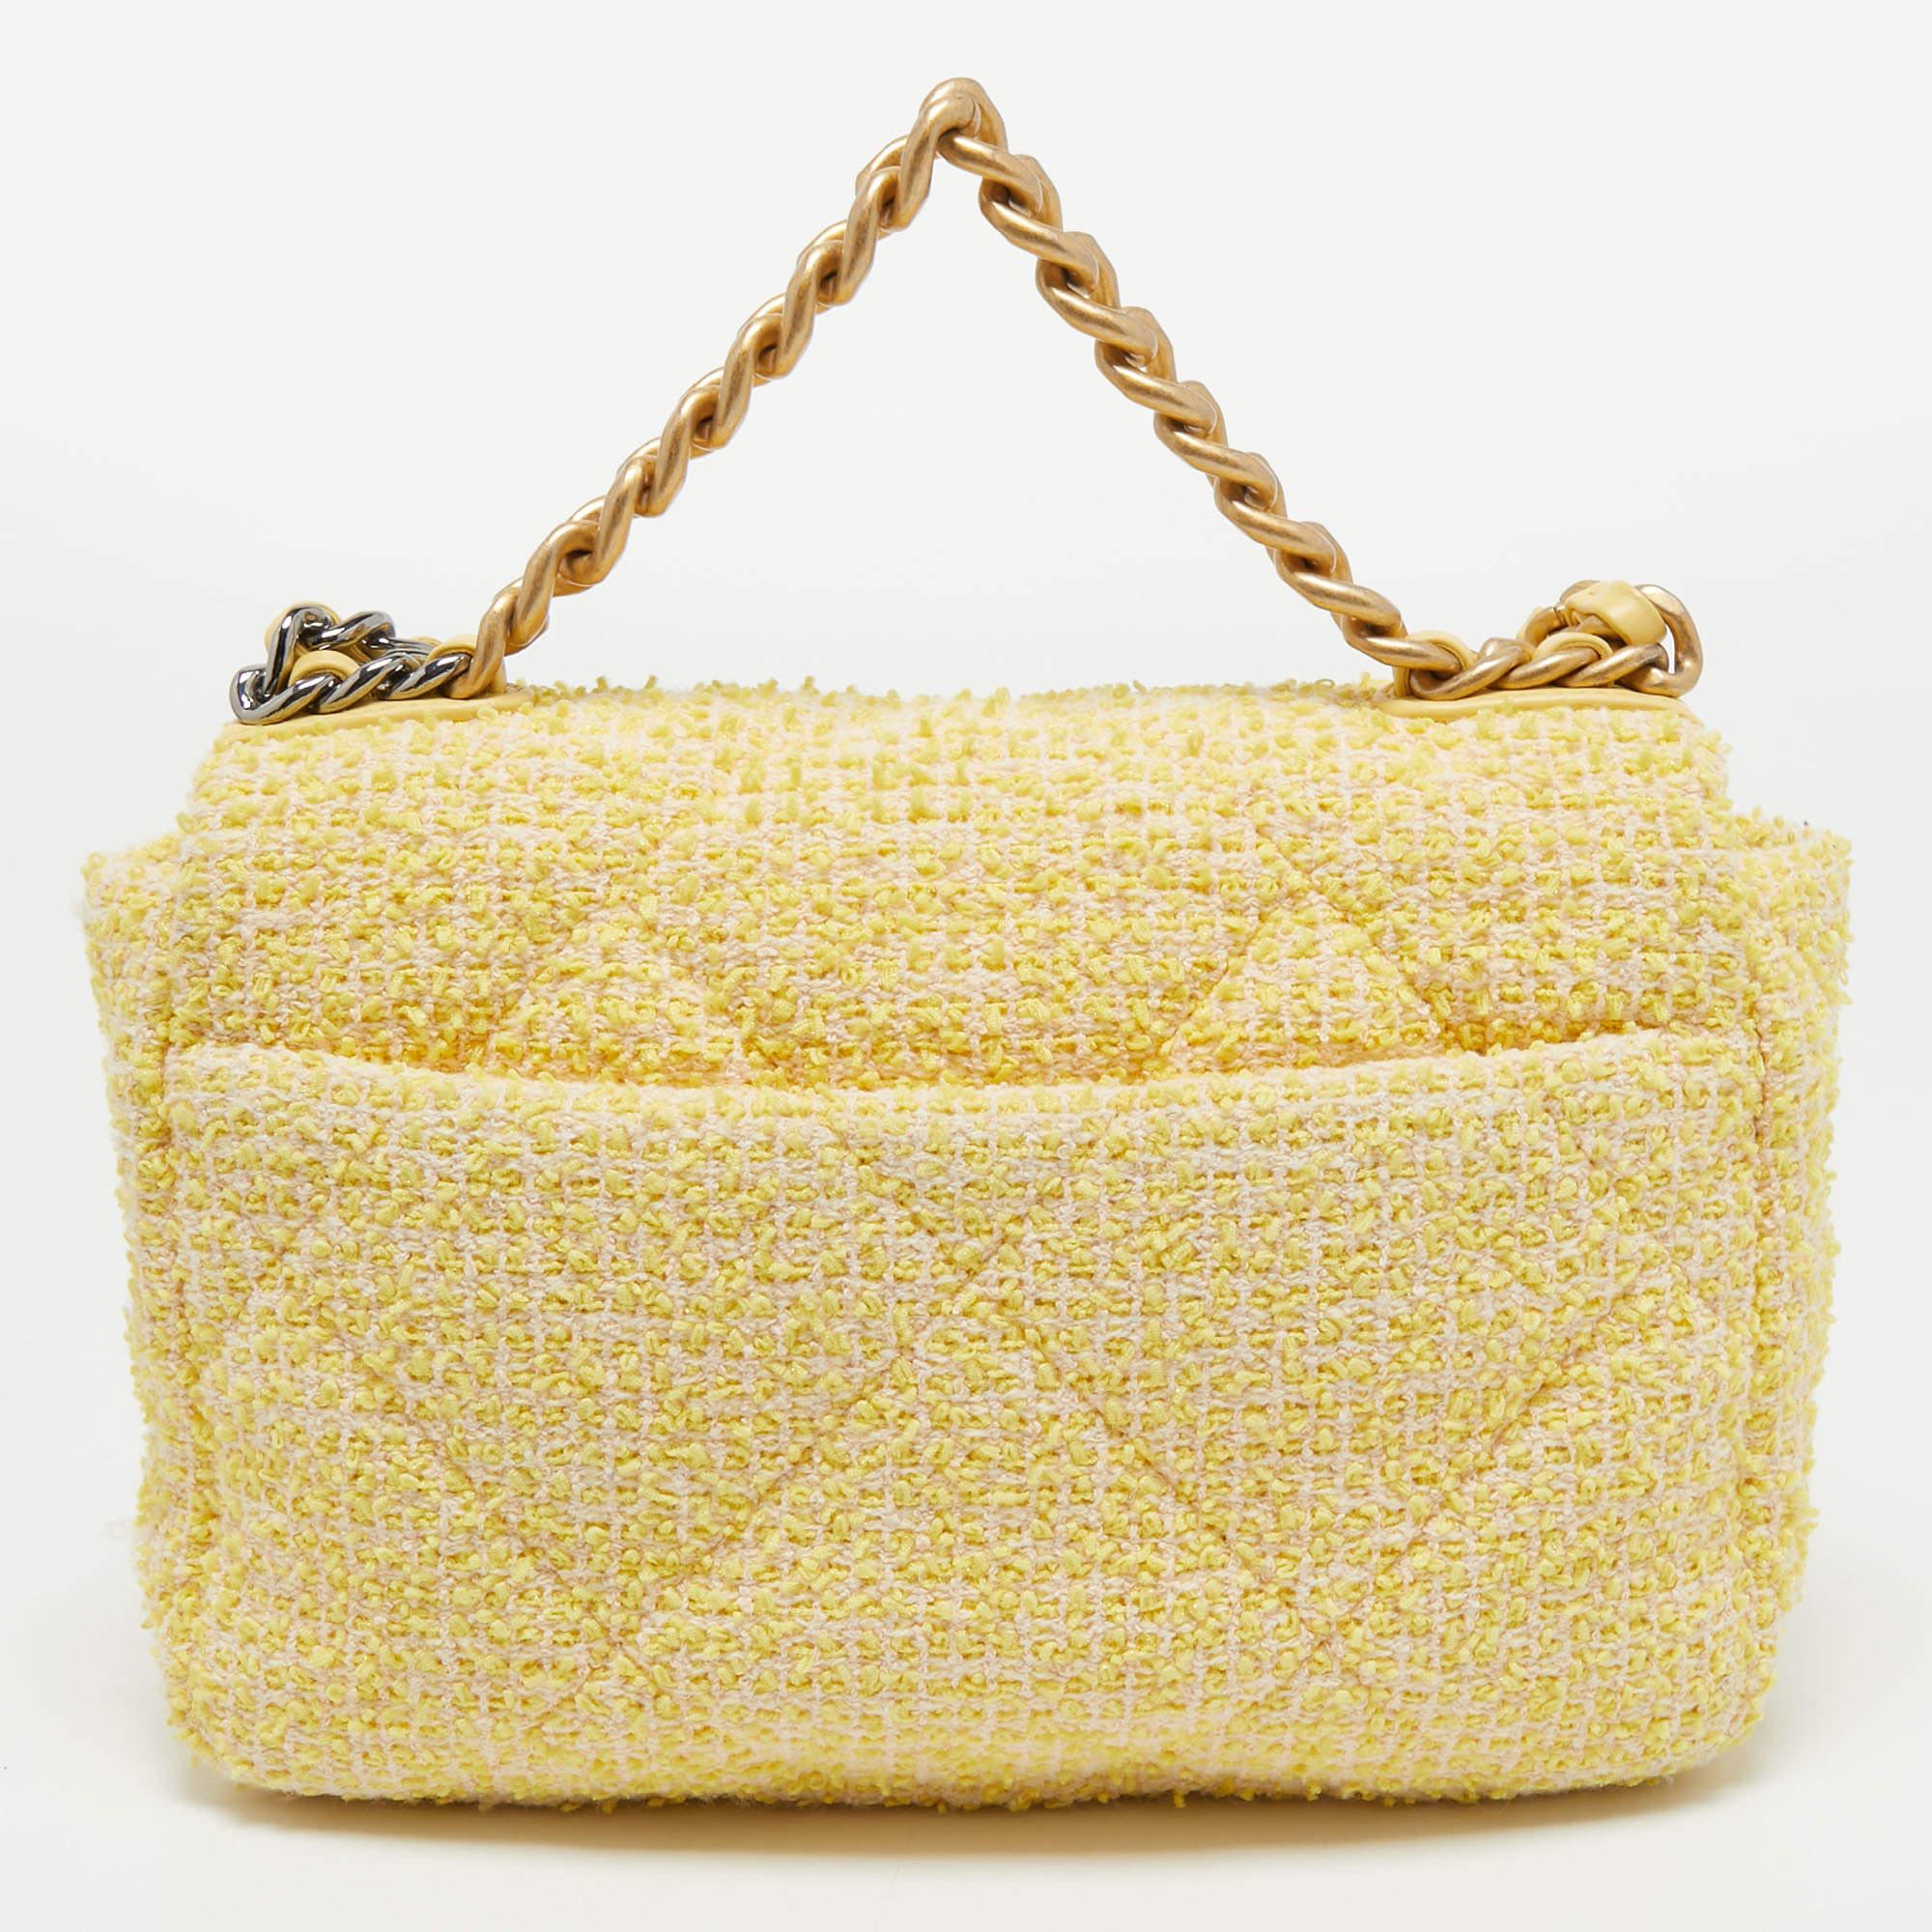 First unveiled in the Chanel Fall 2019 collection, the Chanel 19 bag is named after the year of its release, just like the Chanel 2.55. In design, the bag has exaggerated quilting and hardware in two tones. This version in yellow is made from tweed